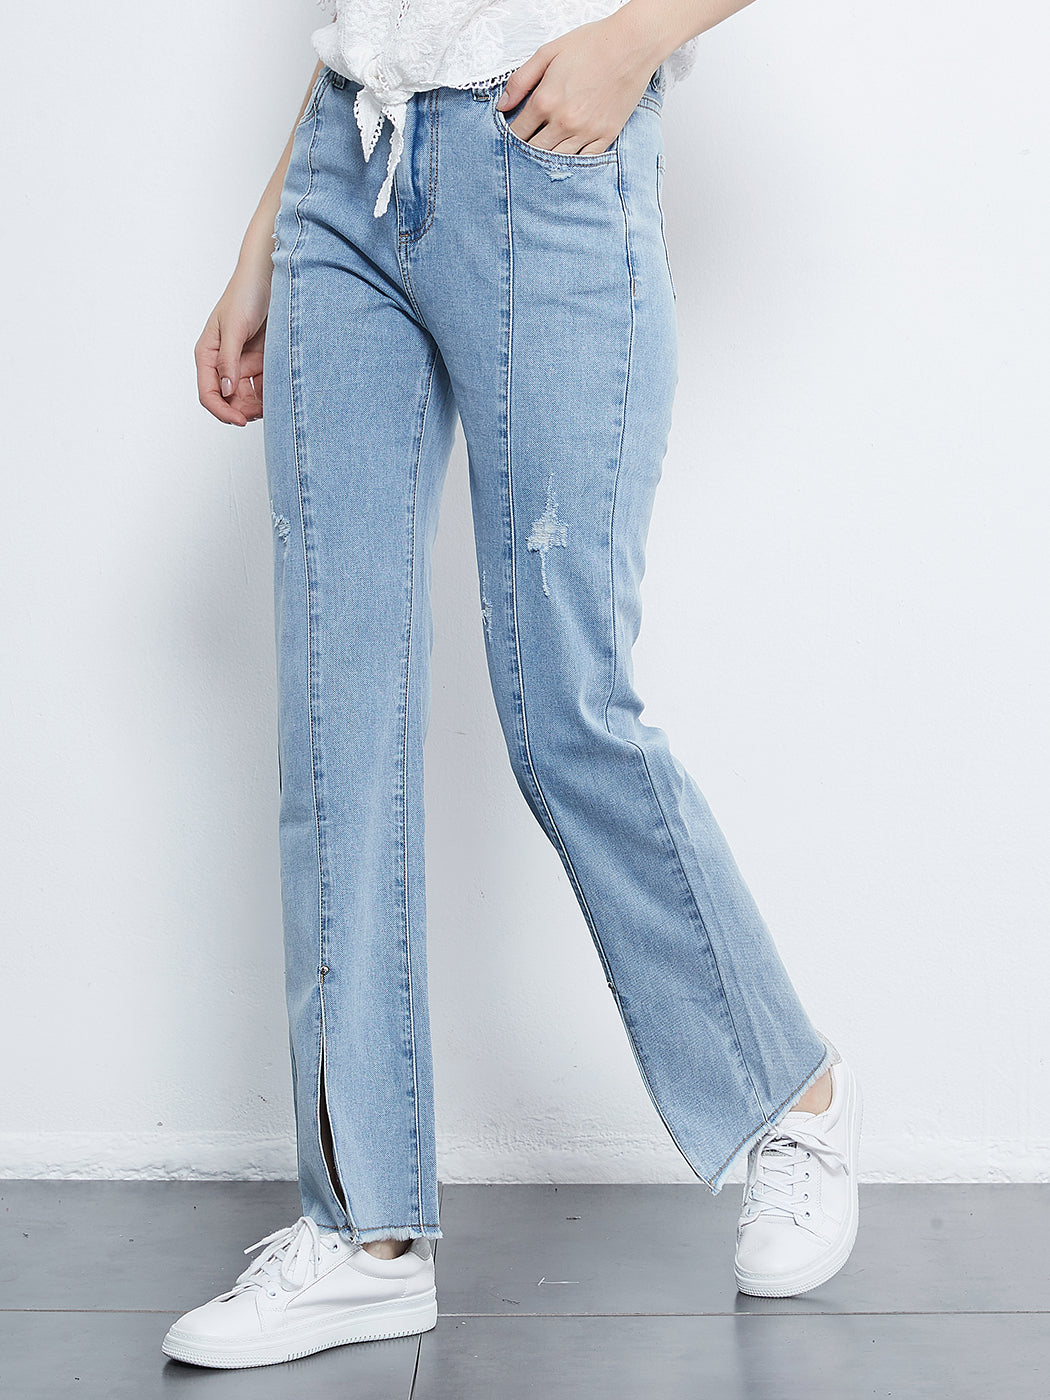 Mid Rise Slit Stretchy Straight Leg Jeans Pants with 5 Pockets